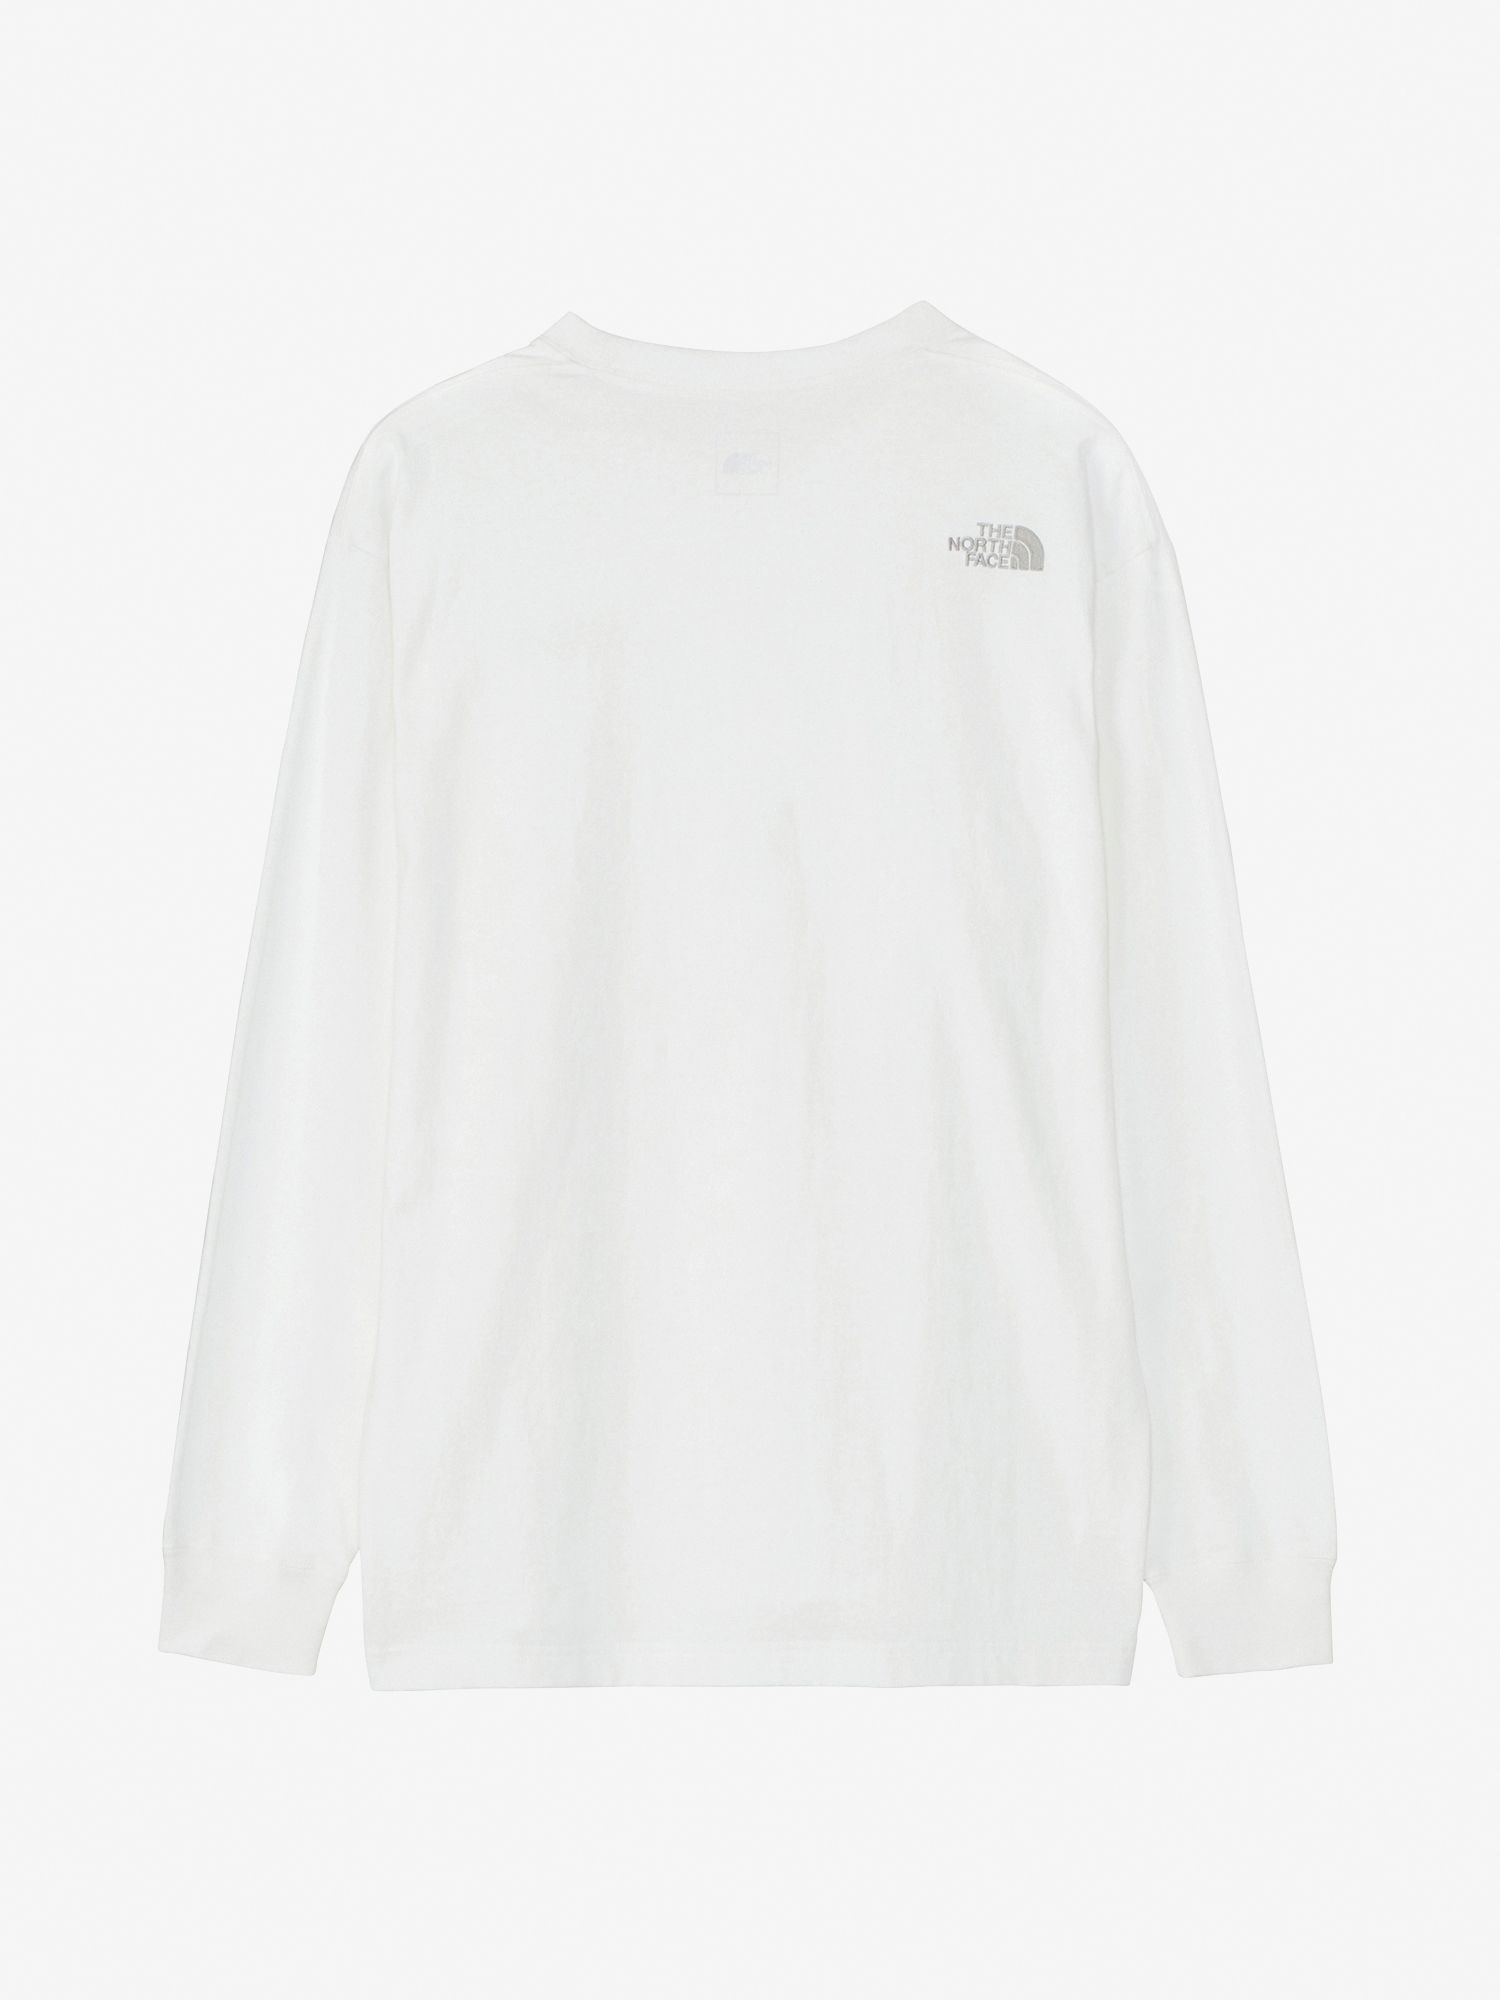 THE NORTH FACE ザ ノースフェイス L/S NEVER STOP ING Tee ロング